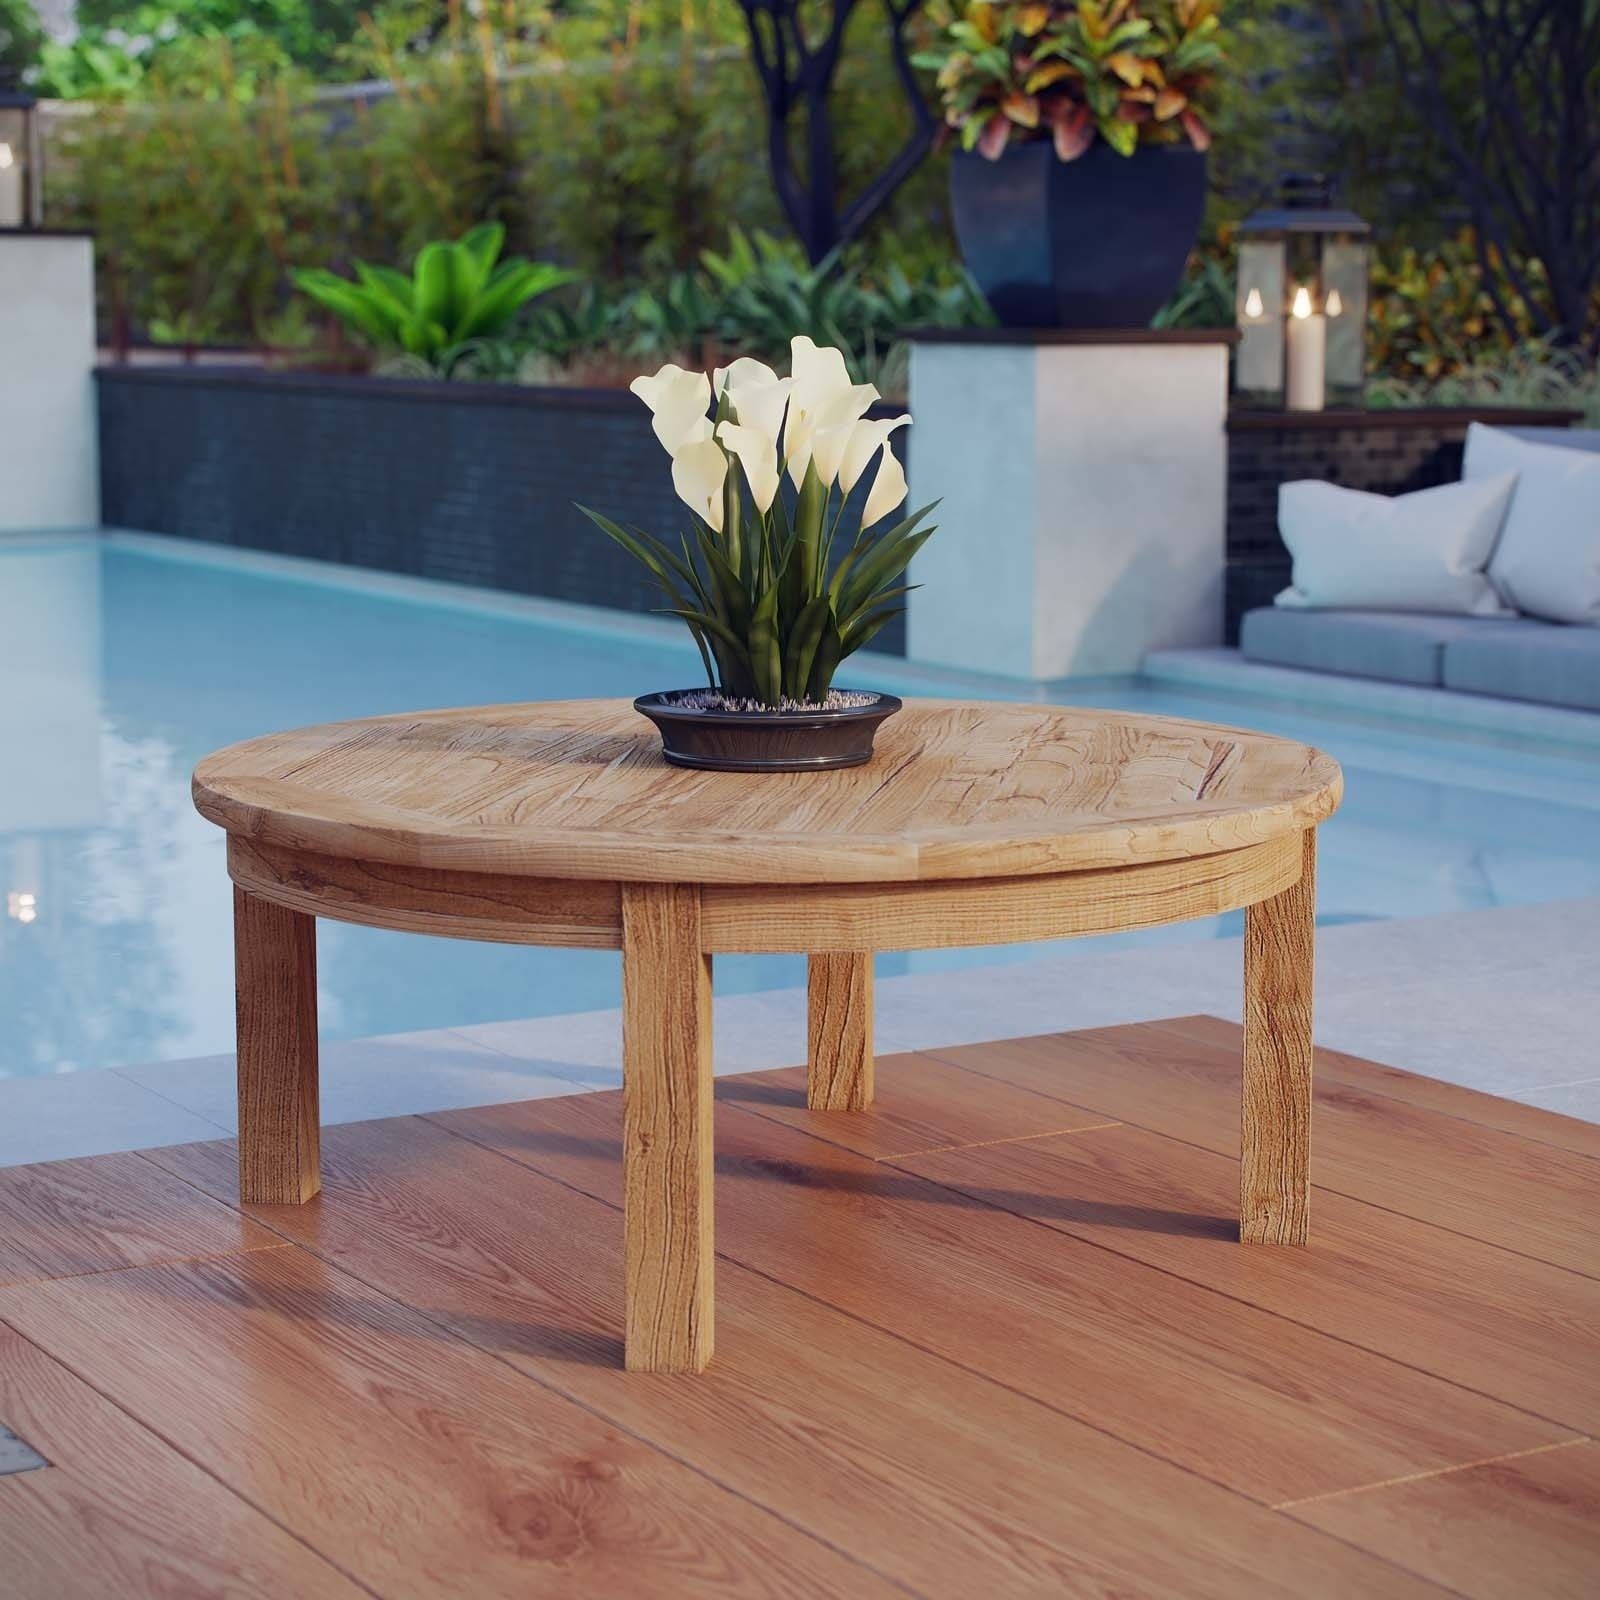 Shop Modway Pier Natural Teak Modern Outdoor Round Patio Coffee Table Regarding Modern Outdoor Patio Coffee Tables (View 3 of 15)